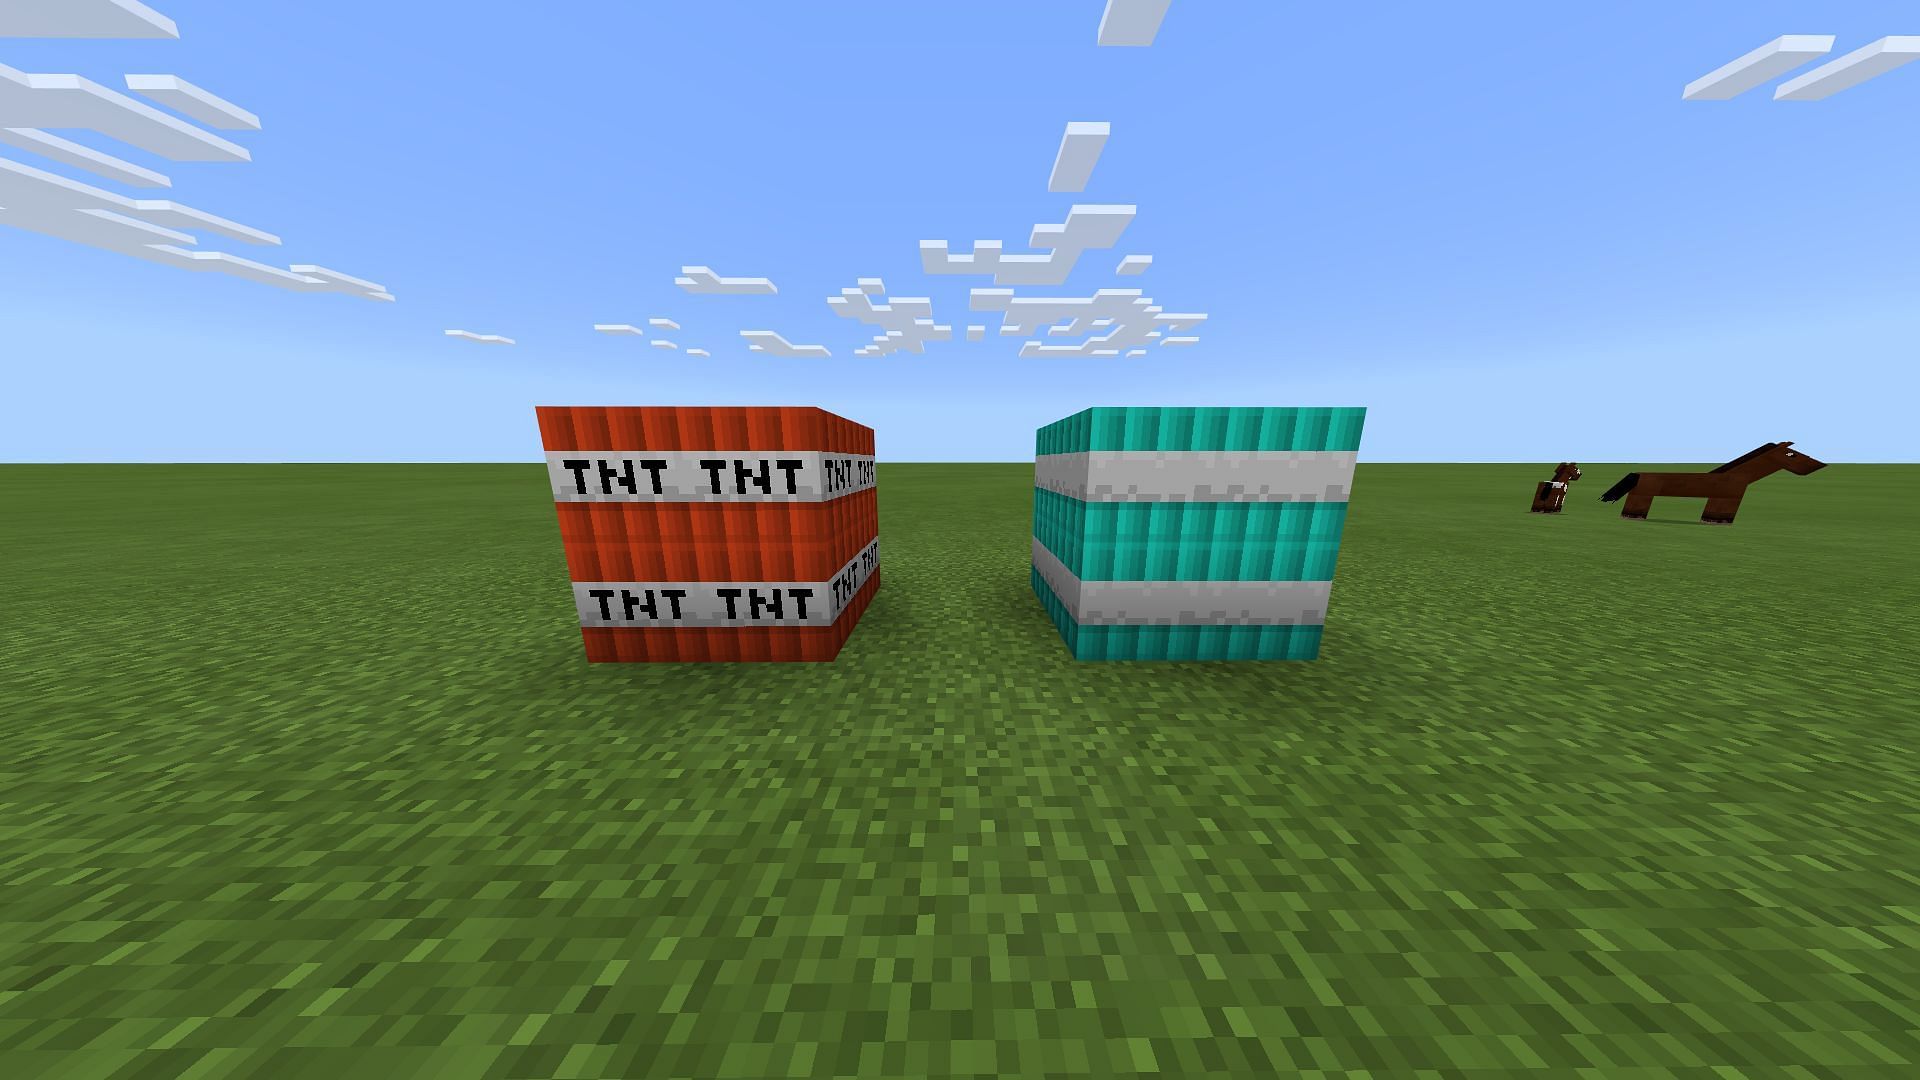 Underwater TNT is blue and does not have its name on it like regular TNT. Image via Minecraft